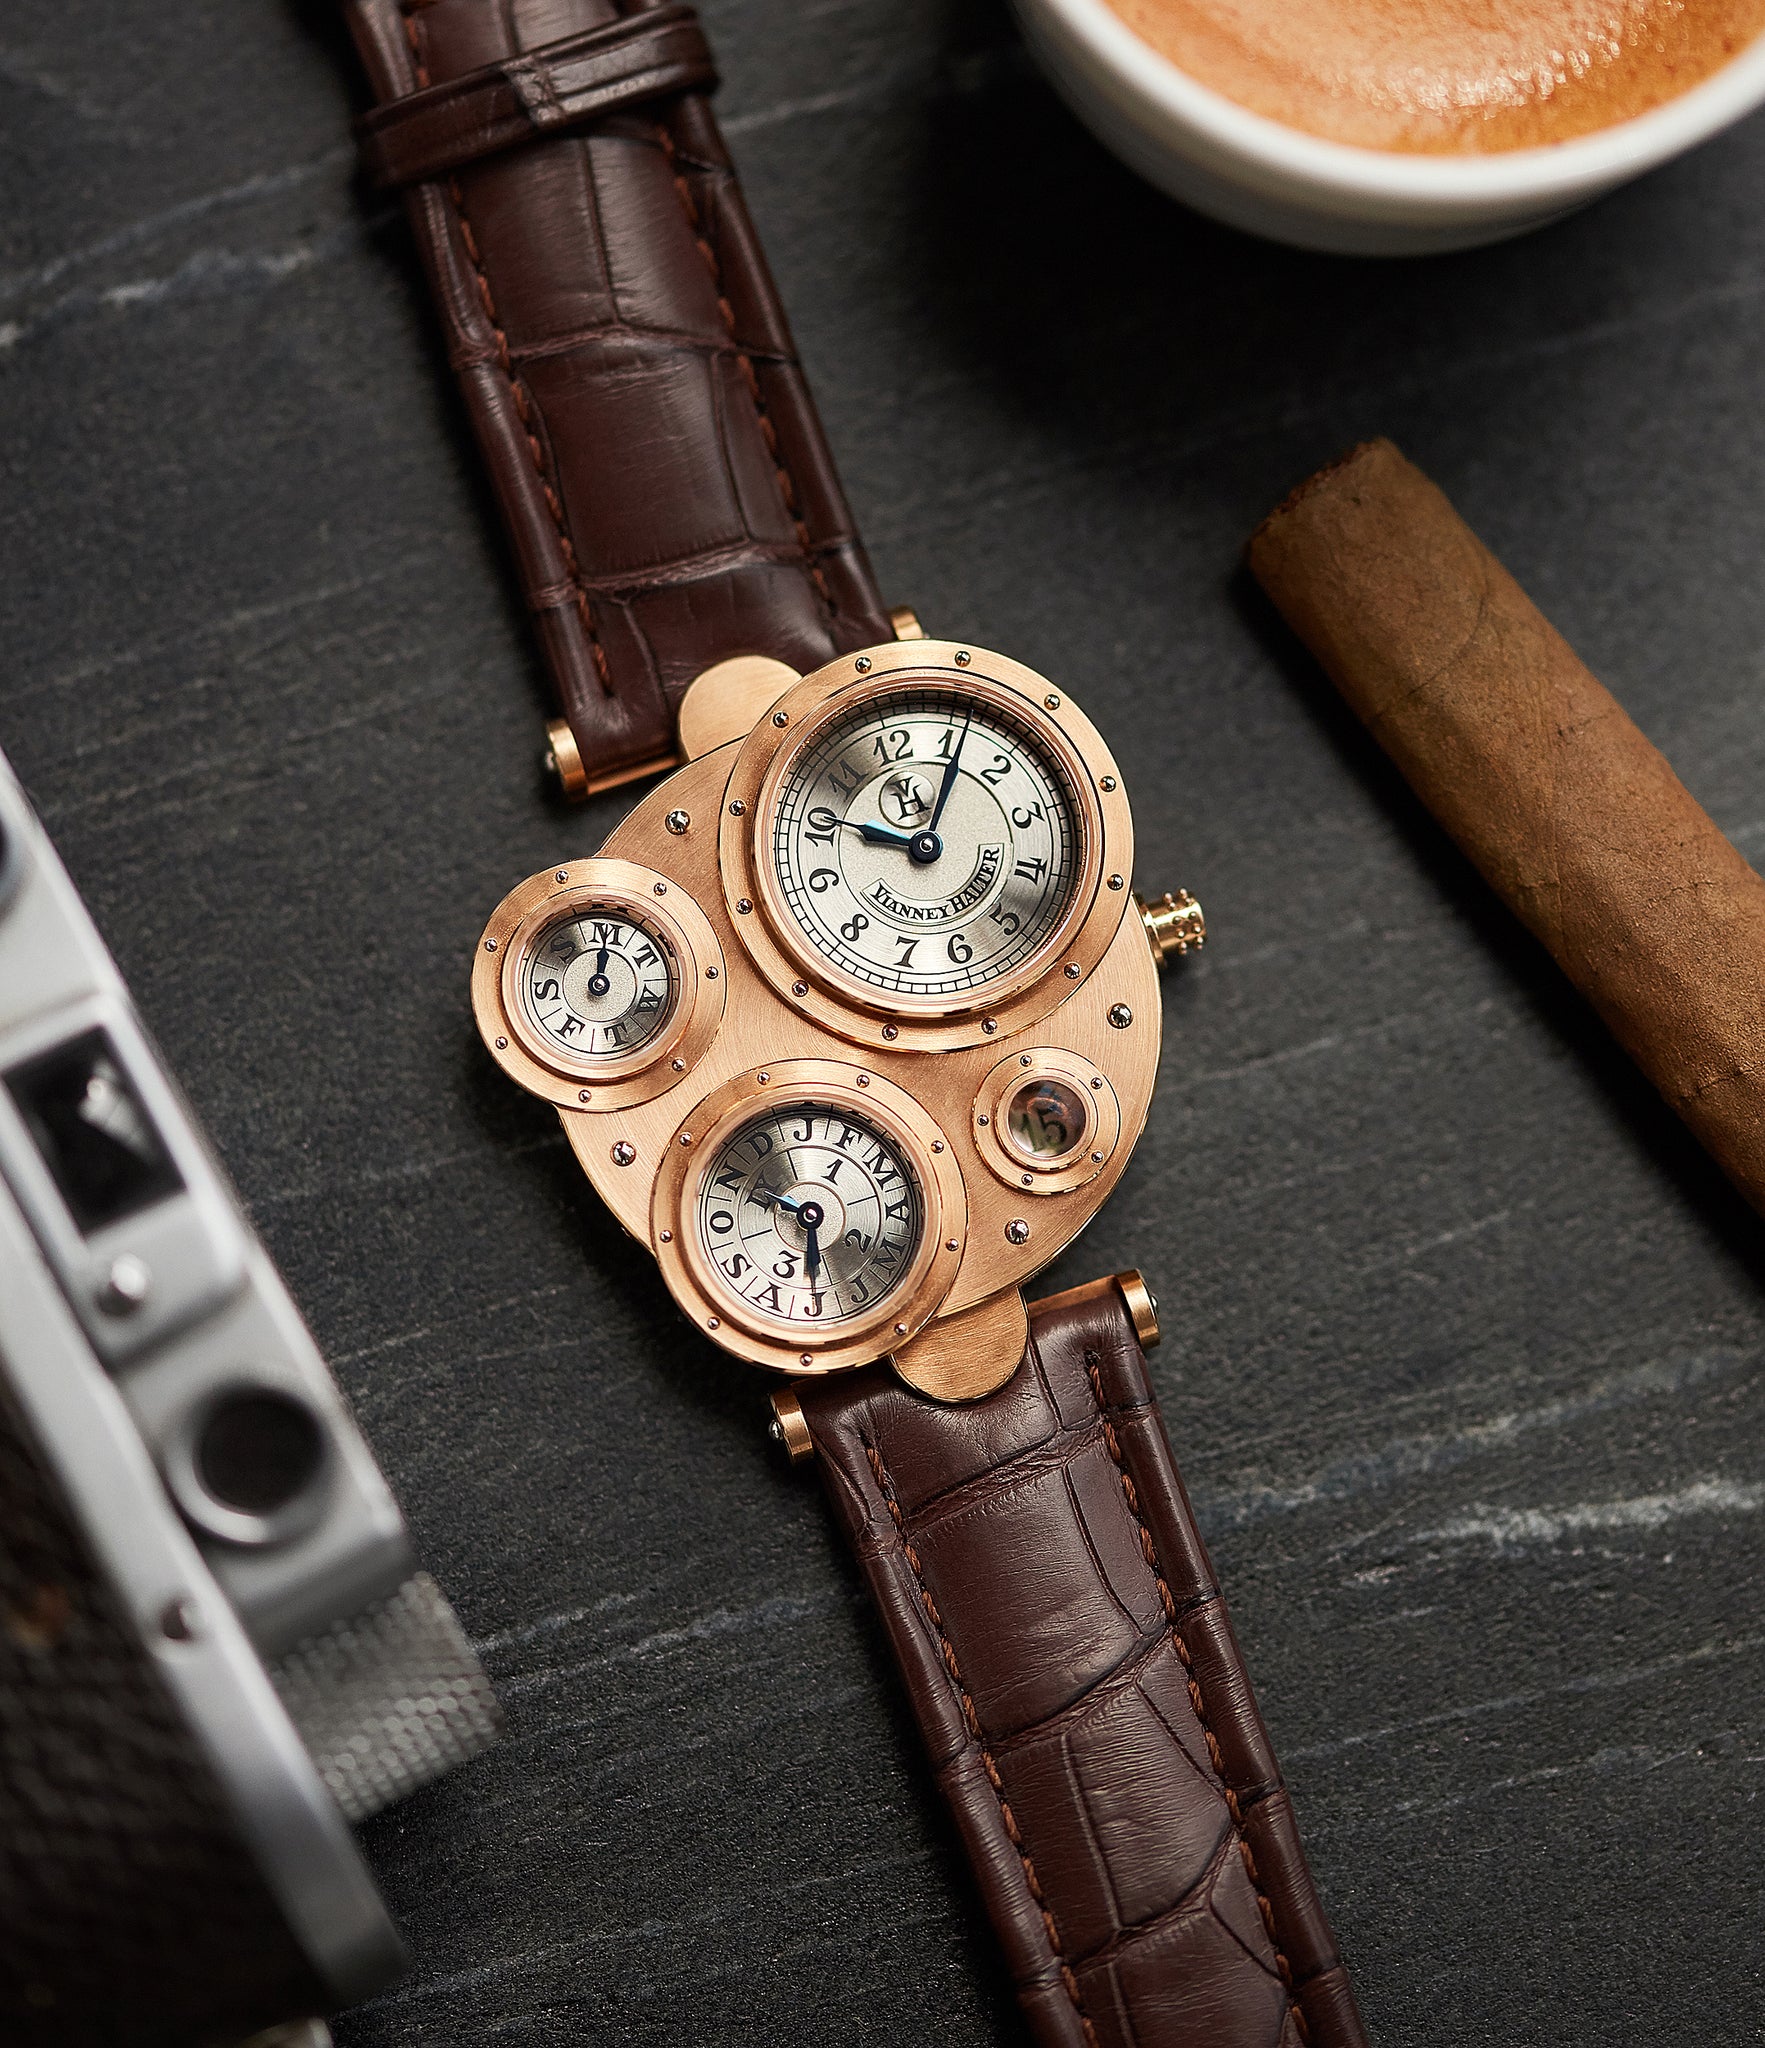 Antiqua Perpetual Calendar rose gold dress watch by Vianney Halter independent watchmaker for sale online at A Collected Man London UK specialist of rare watches